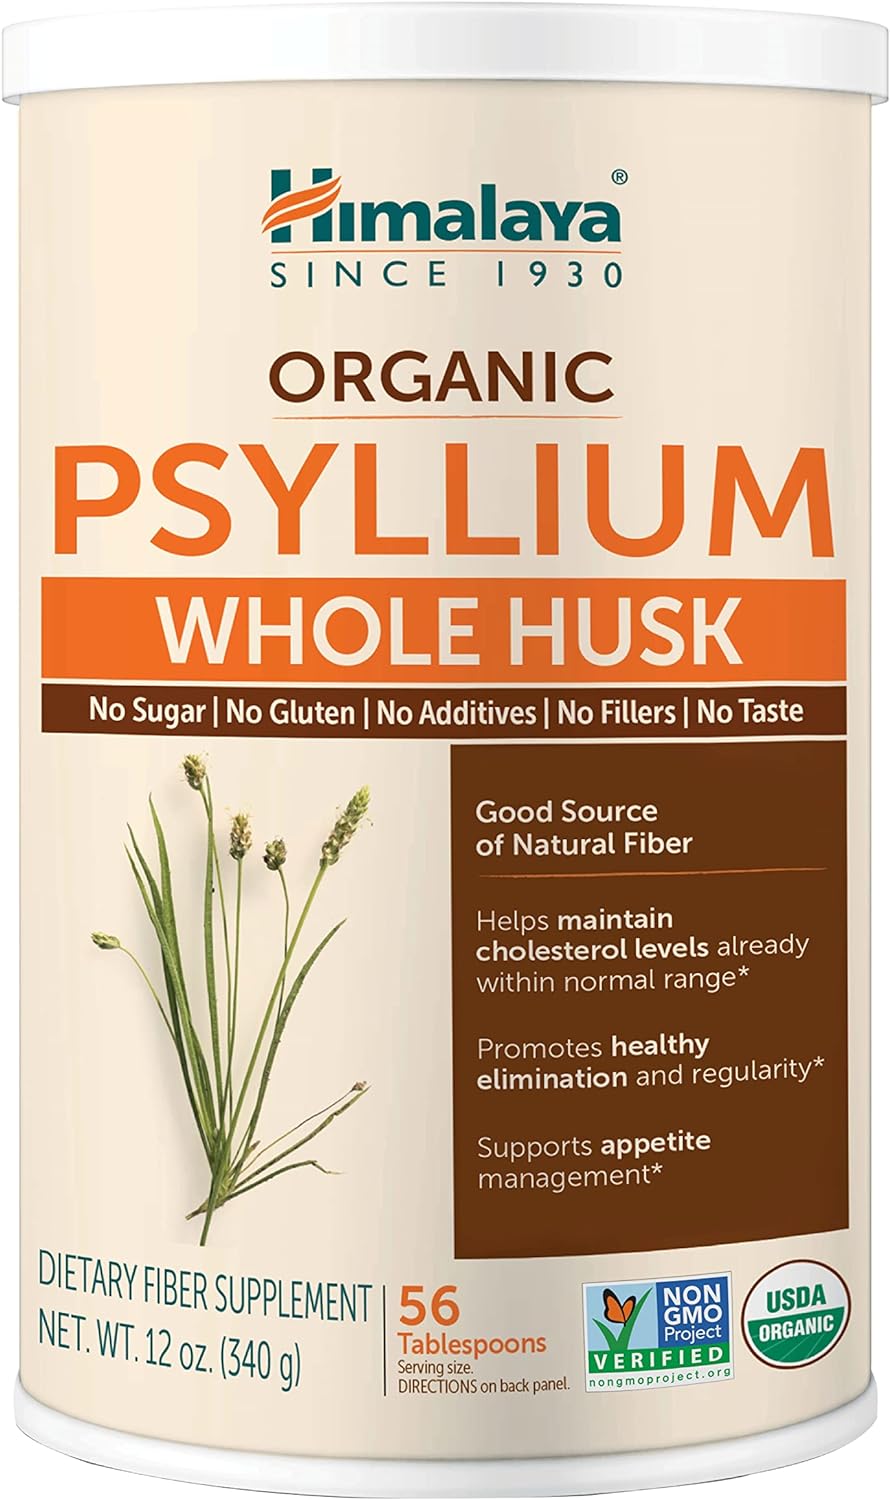 Himalaya Organic Psyllium Whole Husk, Natural Daily Fiber Supplement, Regularity, Appetite Management, USDA Certified Organic, Non-GMO, 56-Tablespoon Supply, Unflavored, 12 Oz